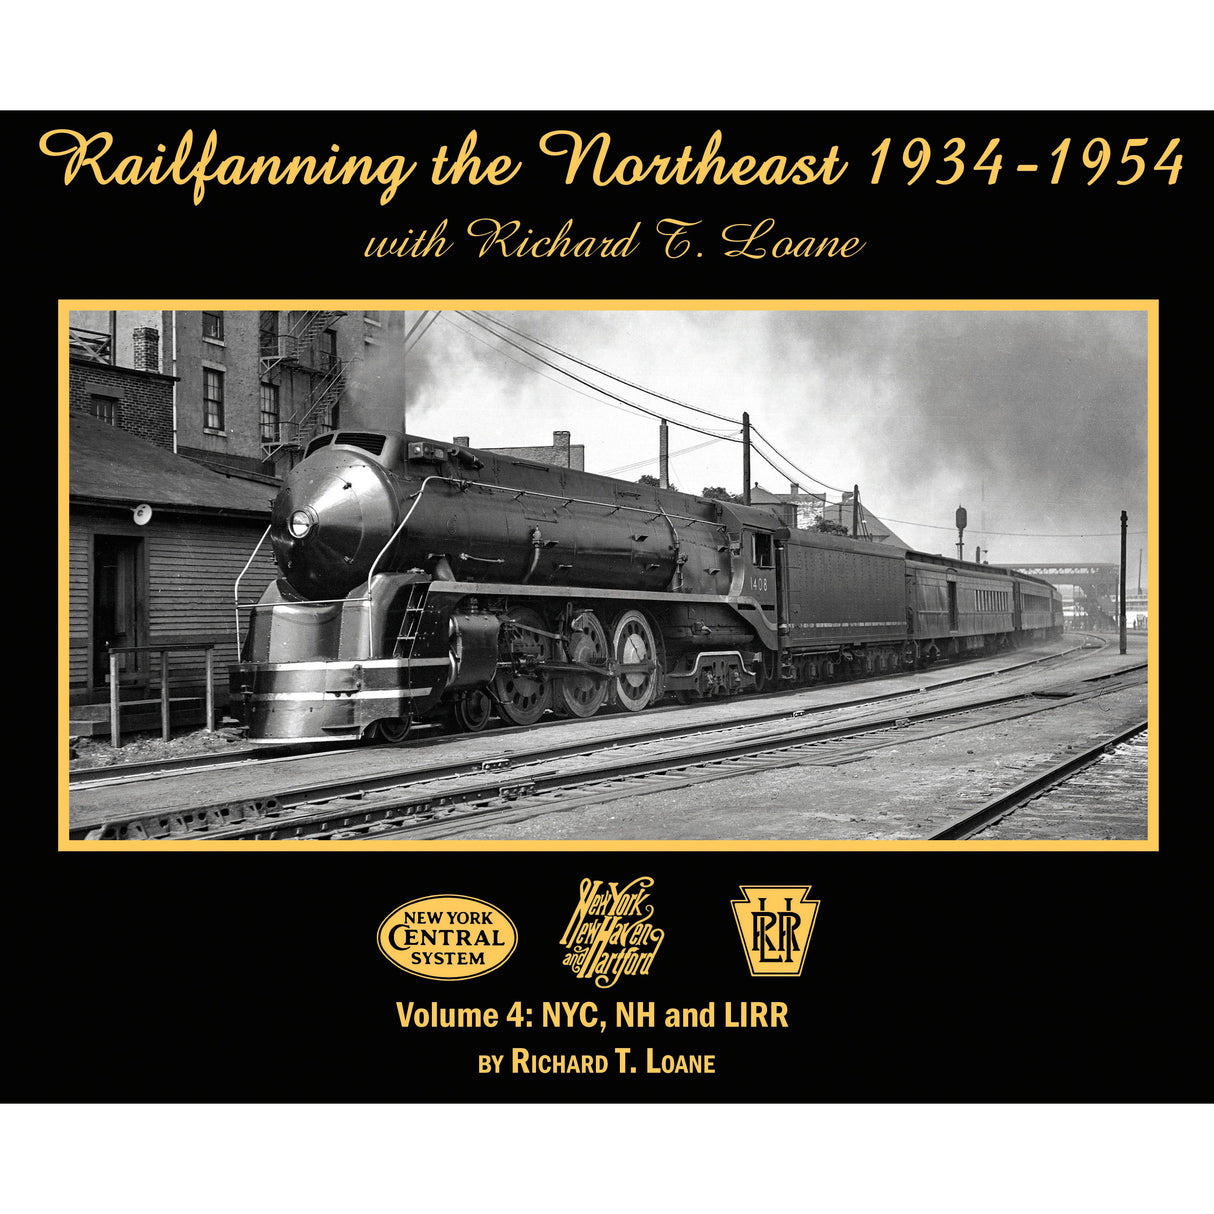 Morning Sun Books Railfanning the Northeast 1934-1954 with Richard T. Loane Volume 4: NYC, NH and LIRR (Softcover)